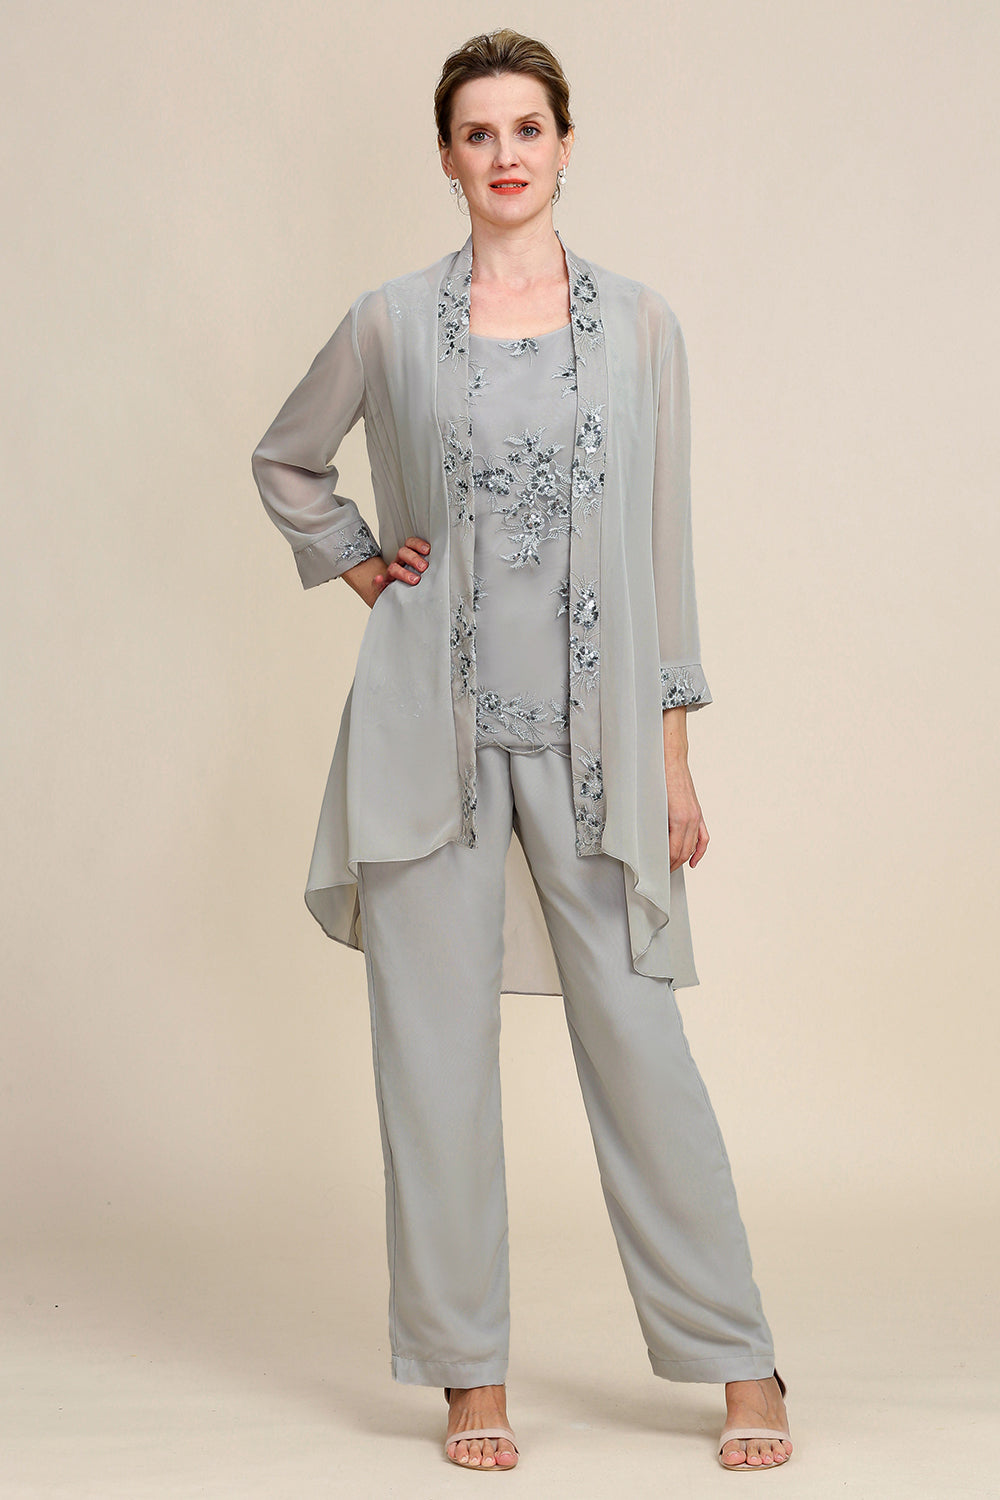 Grey 3 Piece Mother of the Bride Pant Suits with Lace